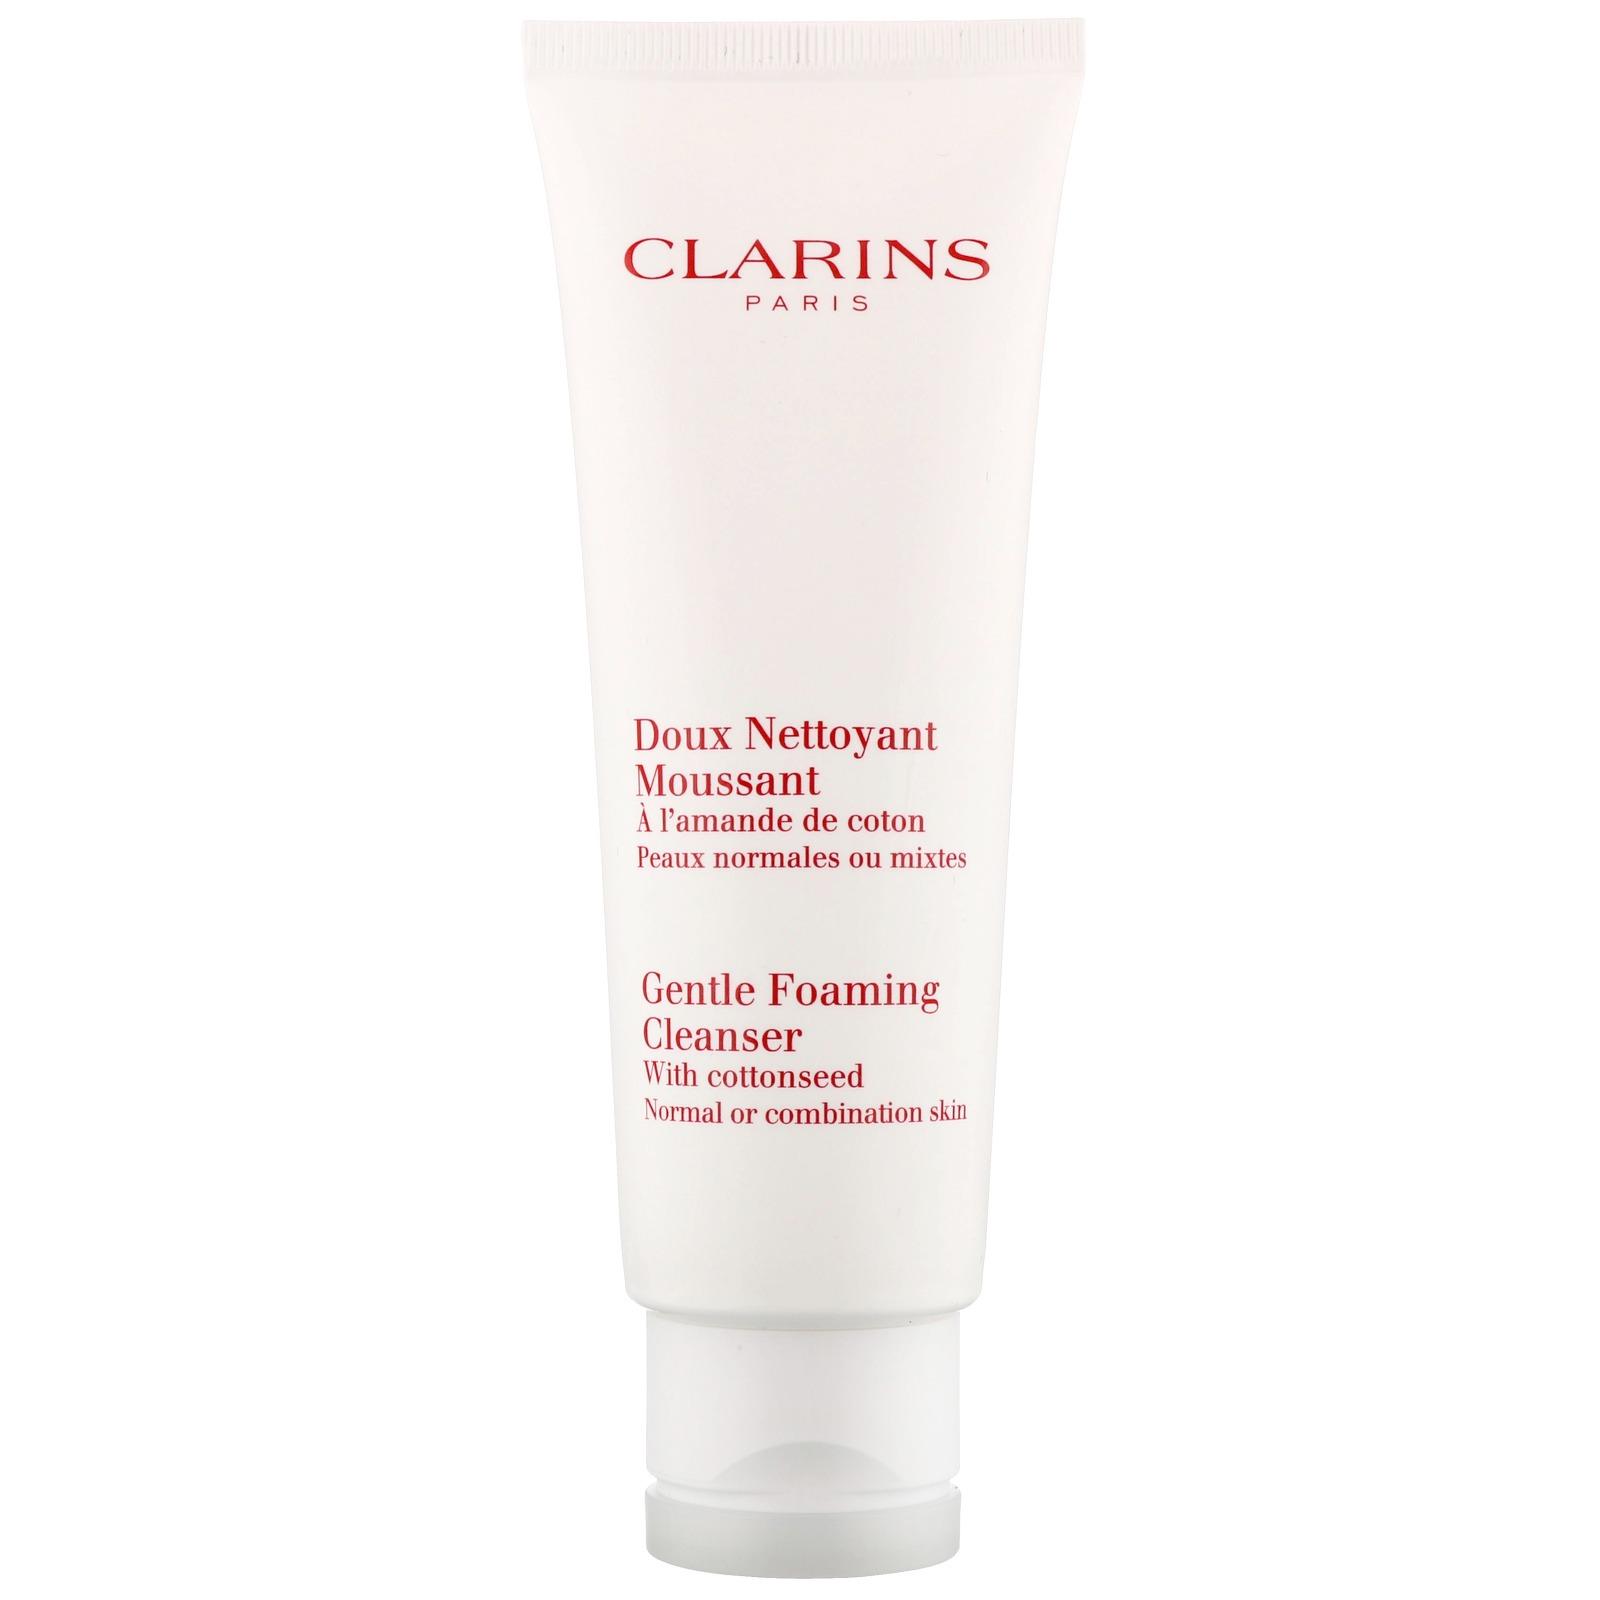 Gentle Foaming Cleanser for Normal or Combination Skin